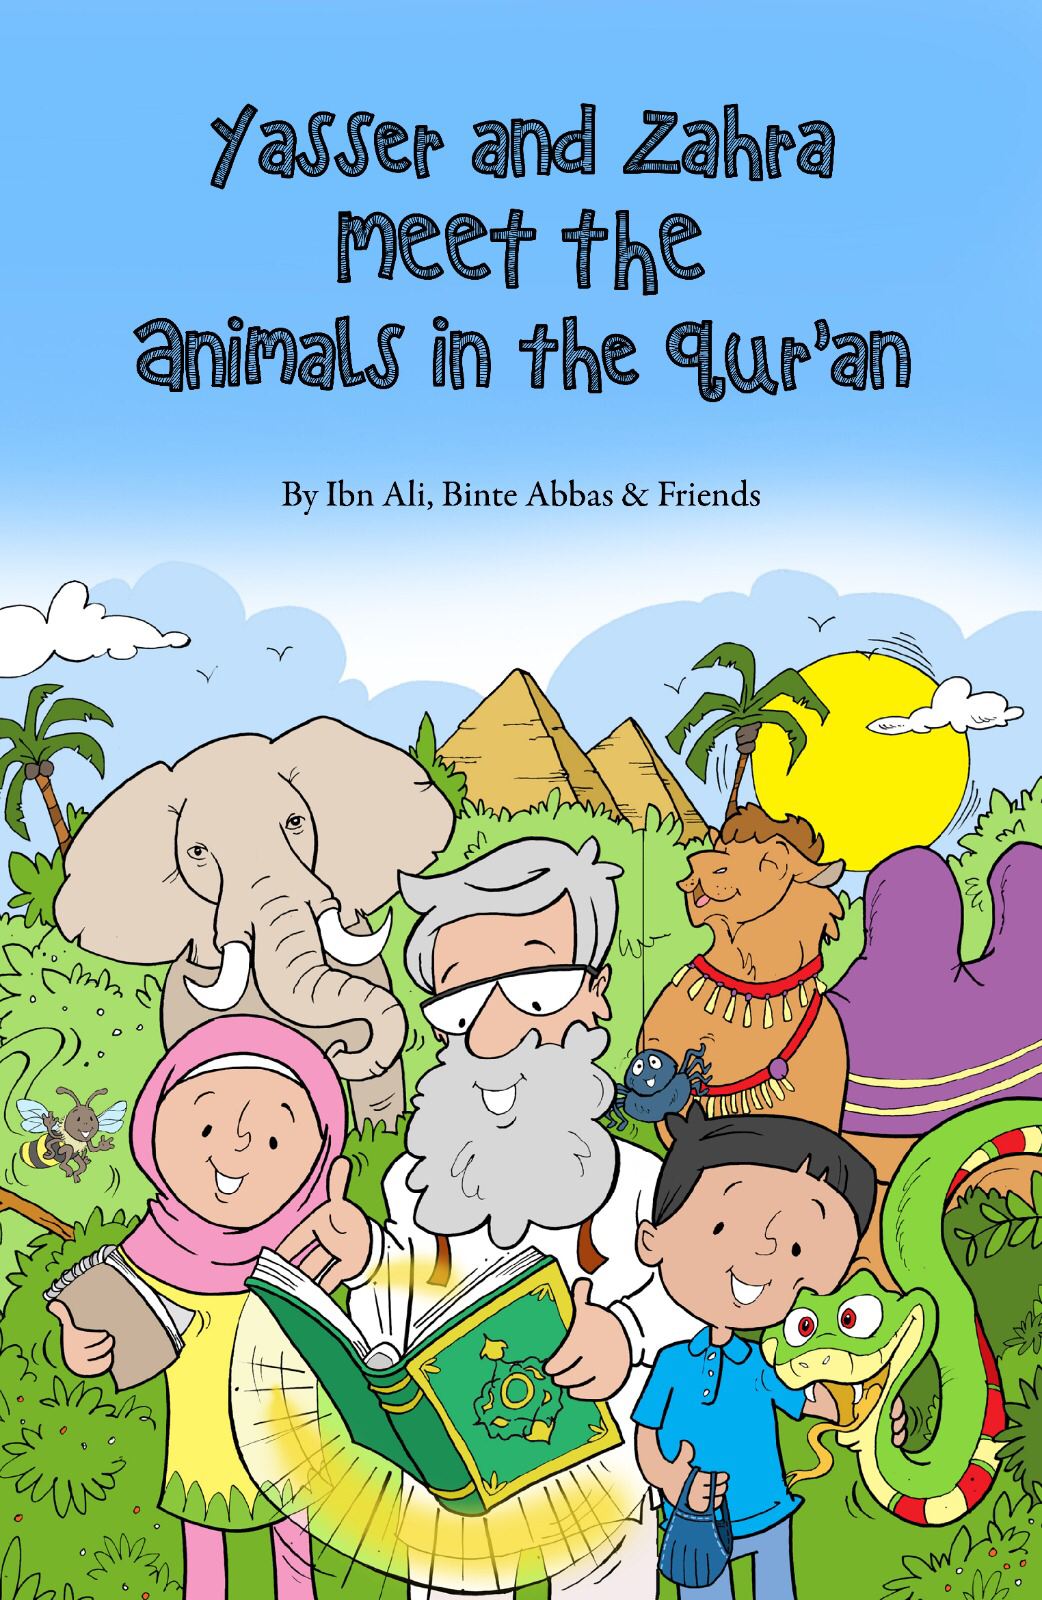 MIC Bookstore] Yasser and Zahra meet the animals in the Qur'an Book Order |  ISIJ of Toronto